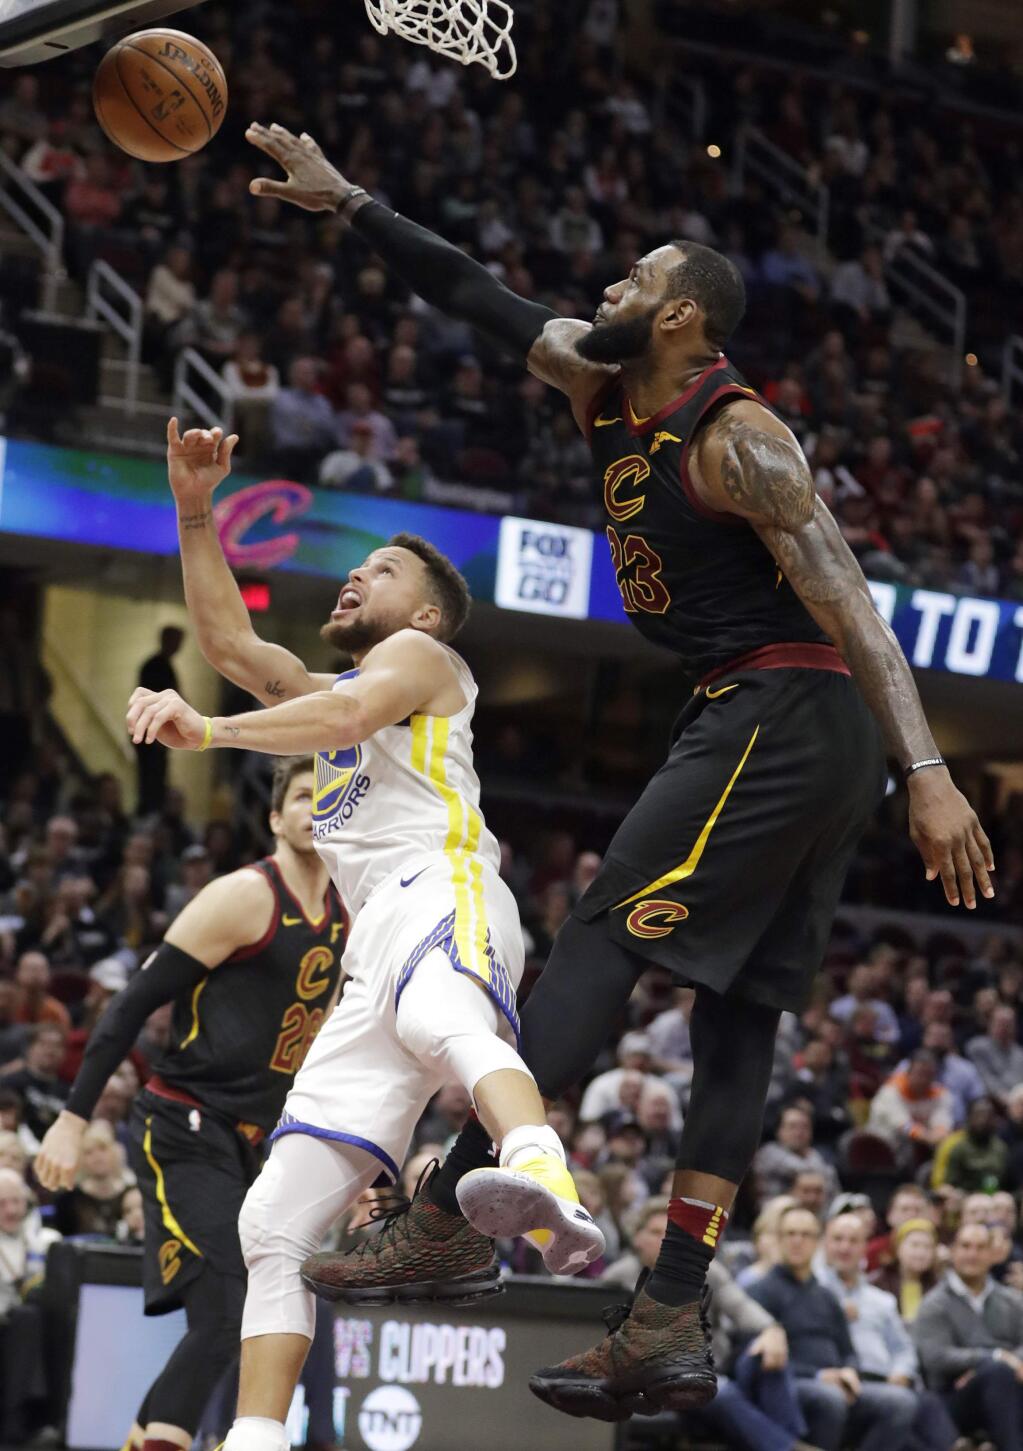 The Cleveland Cavaliers' LeBron James blocks a shot by the Golden State Warriors' Stephen Curry, left, in the second half Monday, Jan. 15, 2018, in Cleveland. (AP Photo/Tony Dejak)